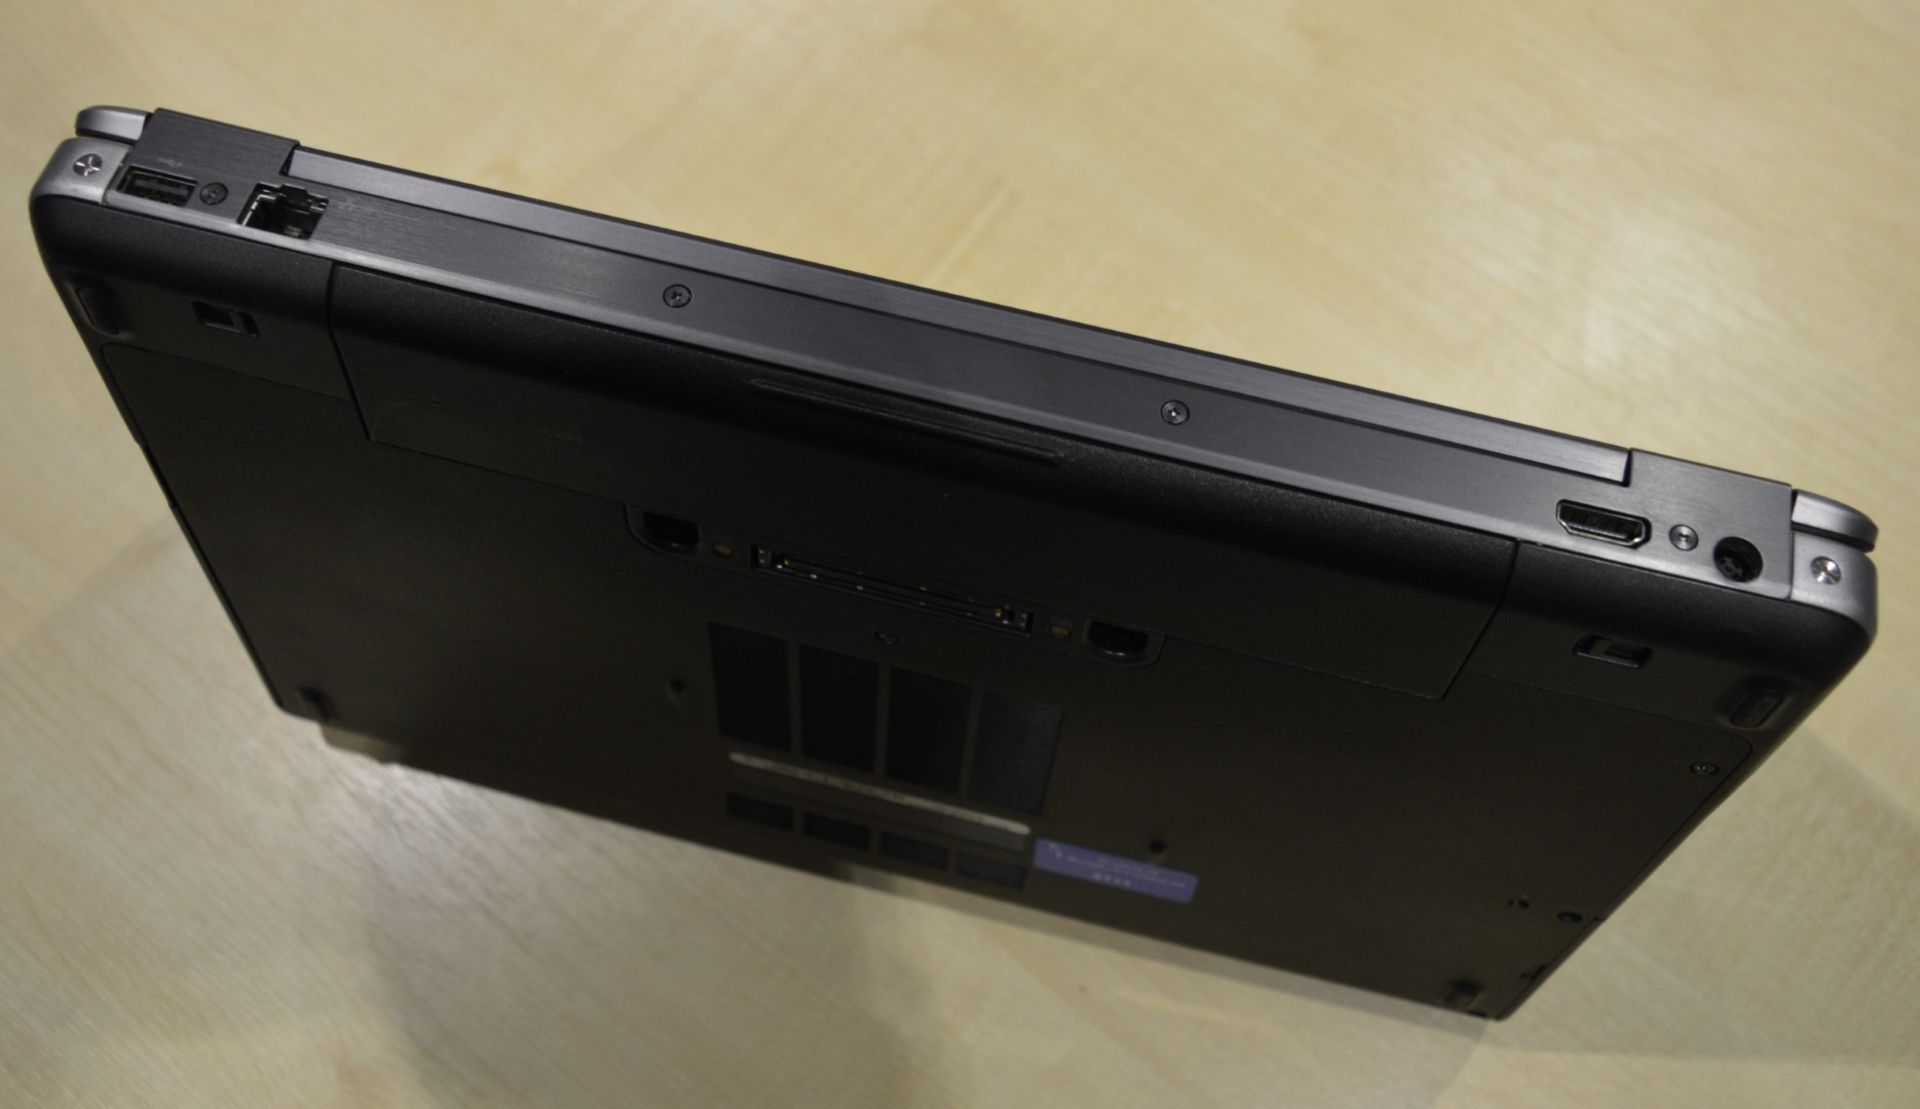 1 x Dell Latitude E6440 14 Inch Laptop - Features Intel Core i5-4300 2.6ghz Processor and 4gb - Image 7 of 7